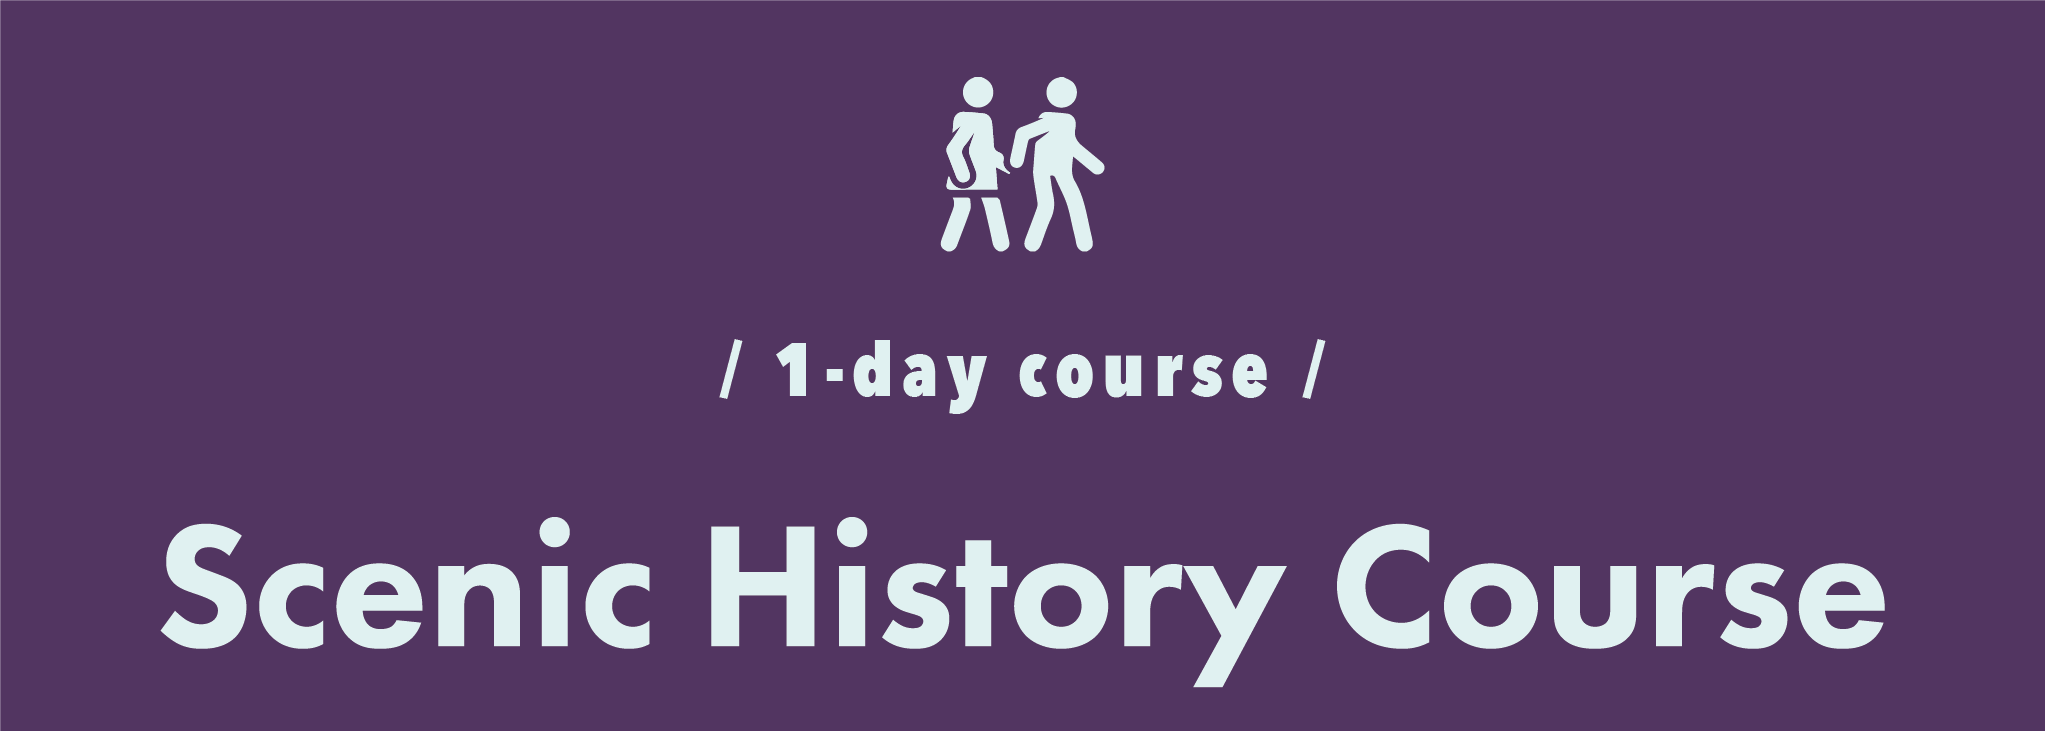 / 1-day course / Scenic History Course